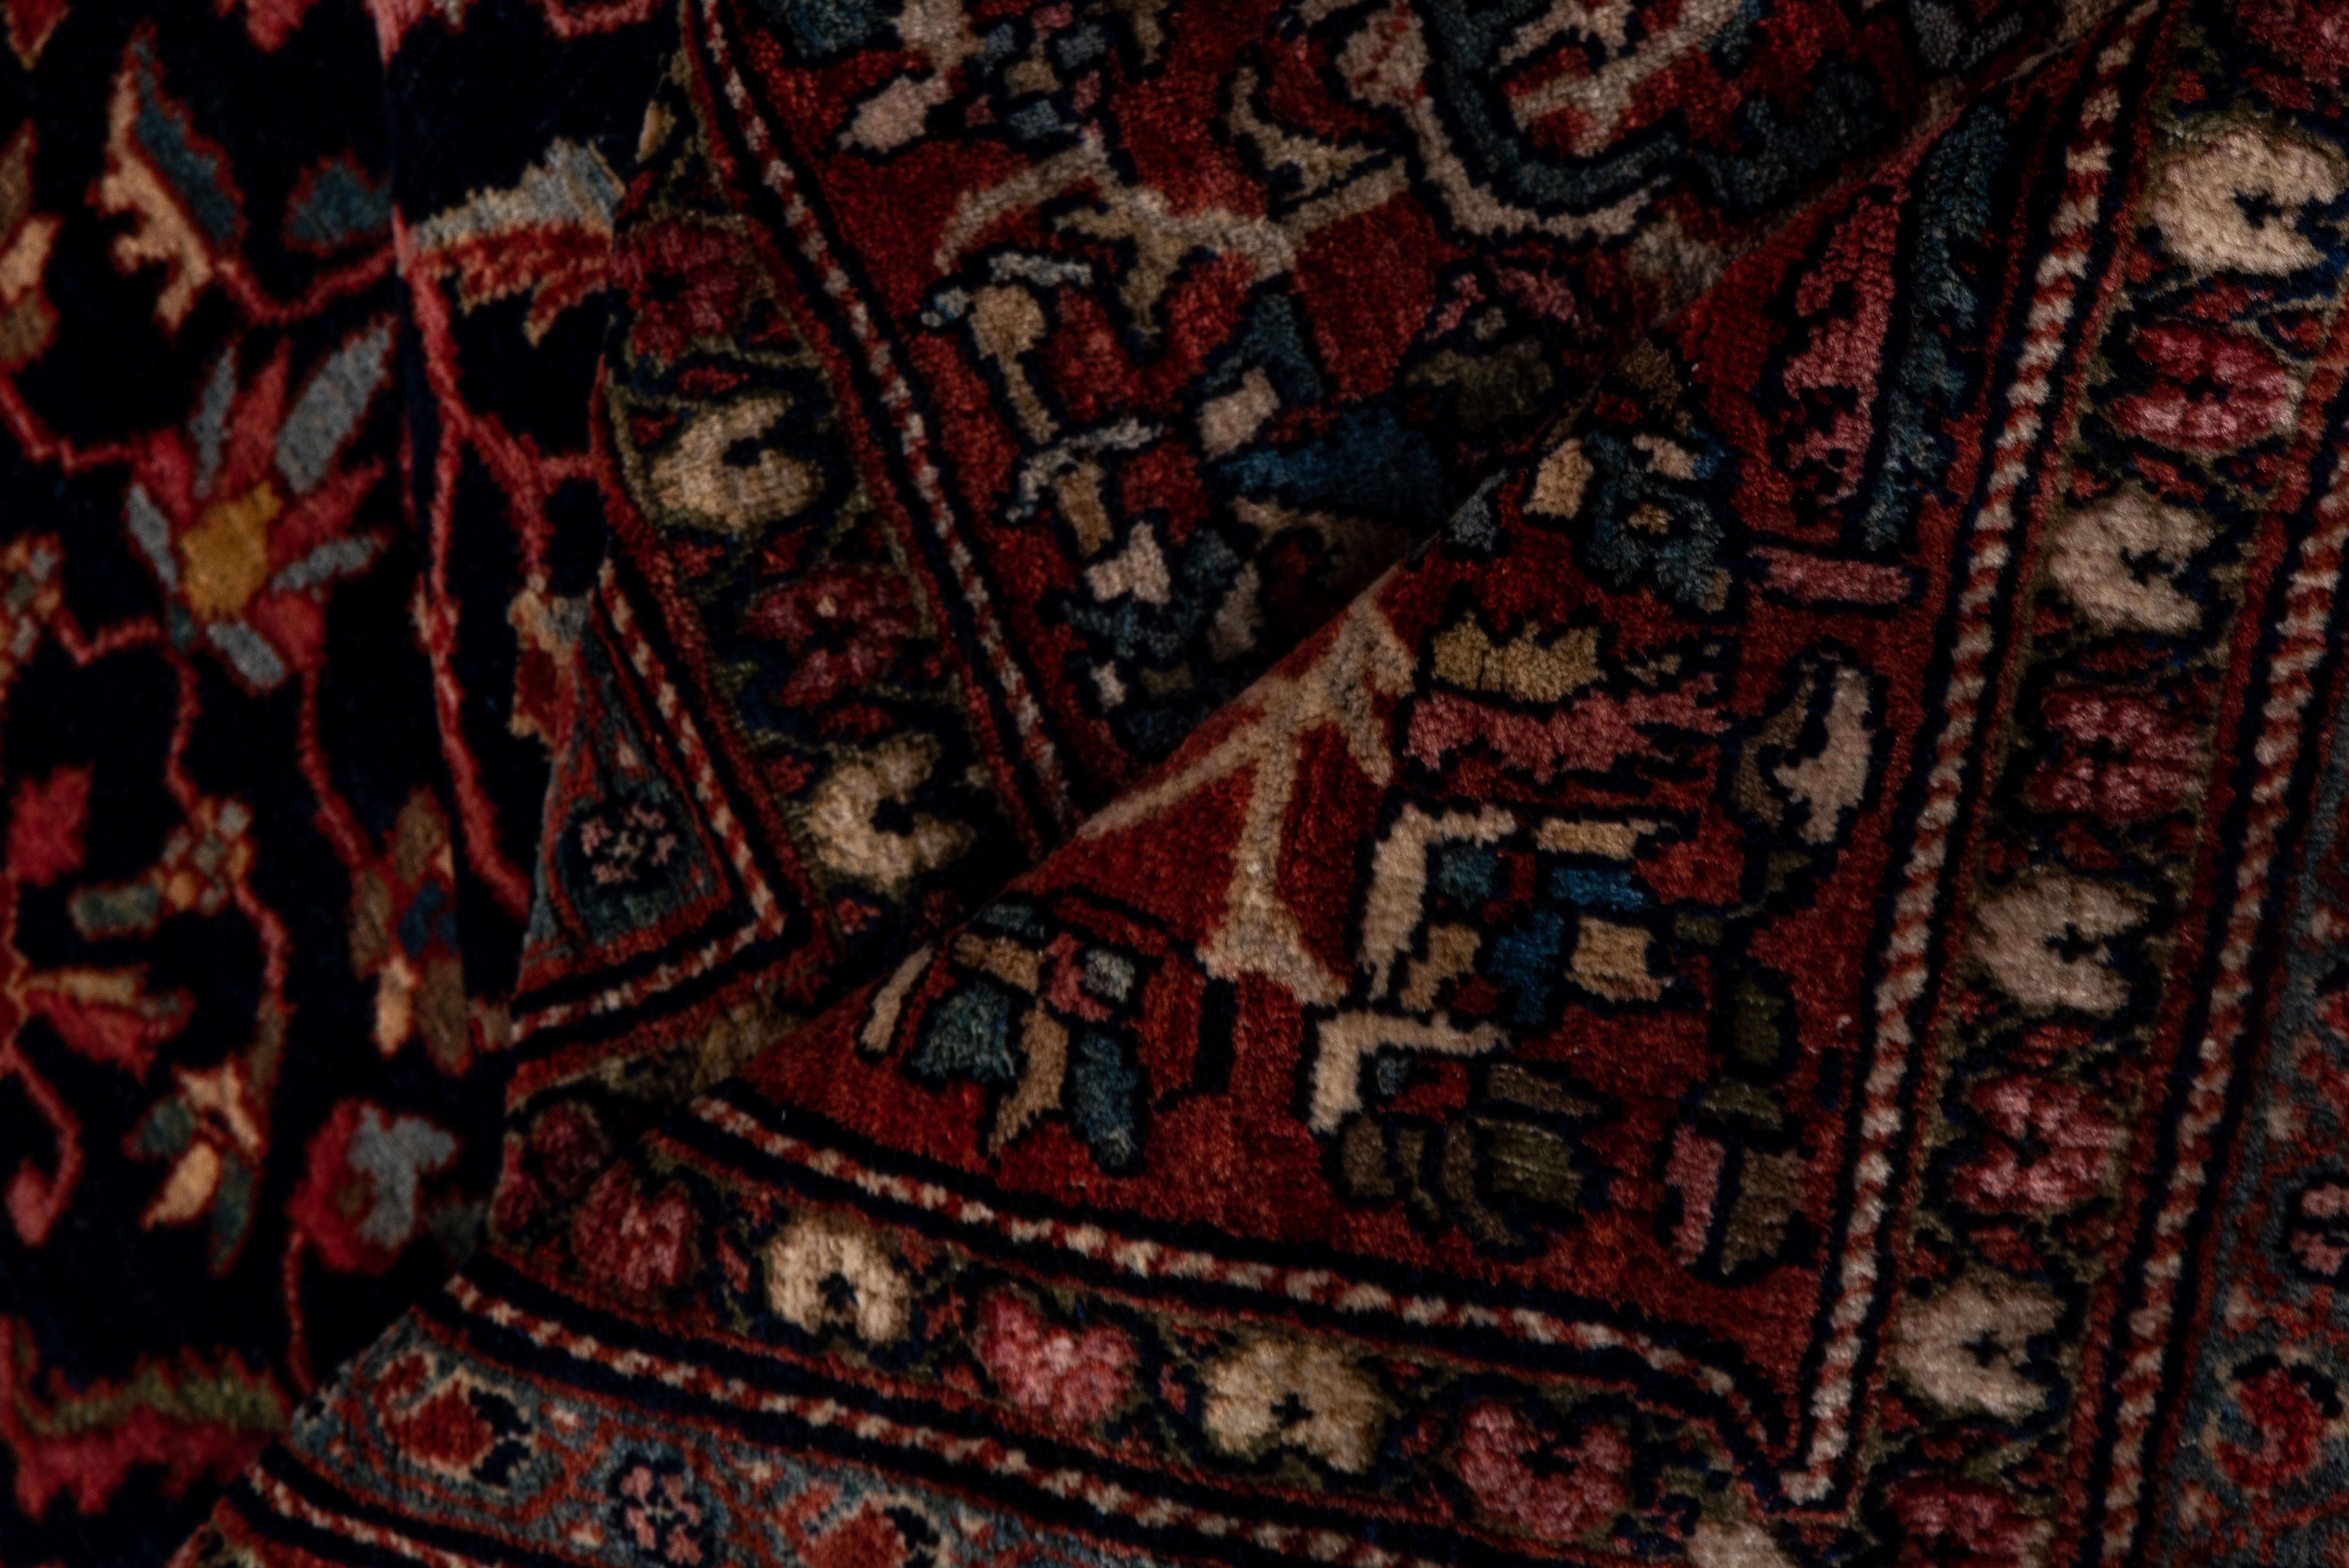 No medallion or large central motif, but a very dense, small all-over pattern of tiny palmettes, diminutive rosettes and tiny leaves closely covers the midnight navy ground, framed by a red border of ivory vinery sections entangling palmettes. Great